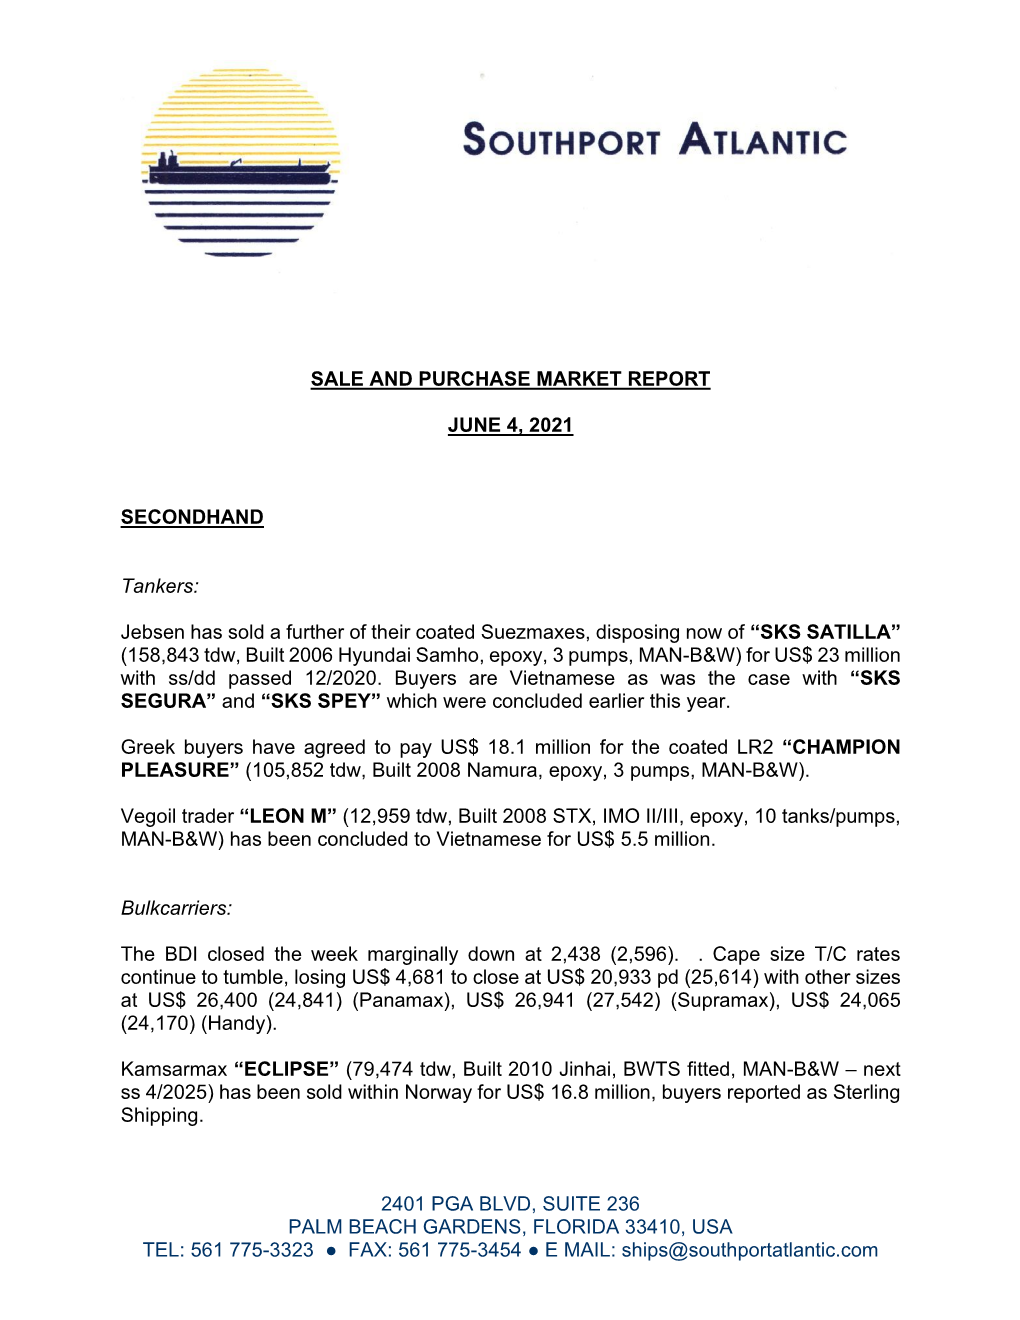 Sale and Purchase Market Report